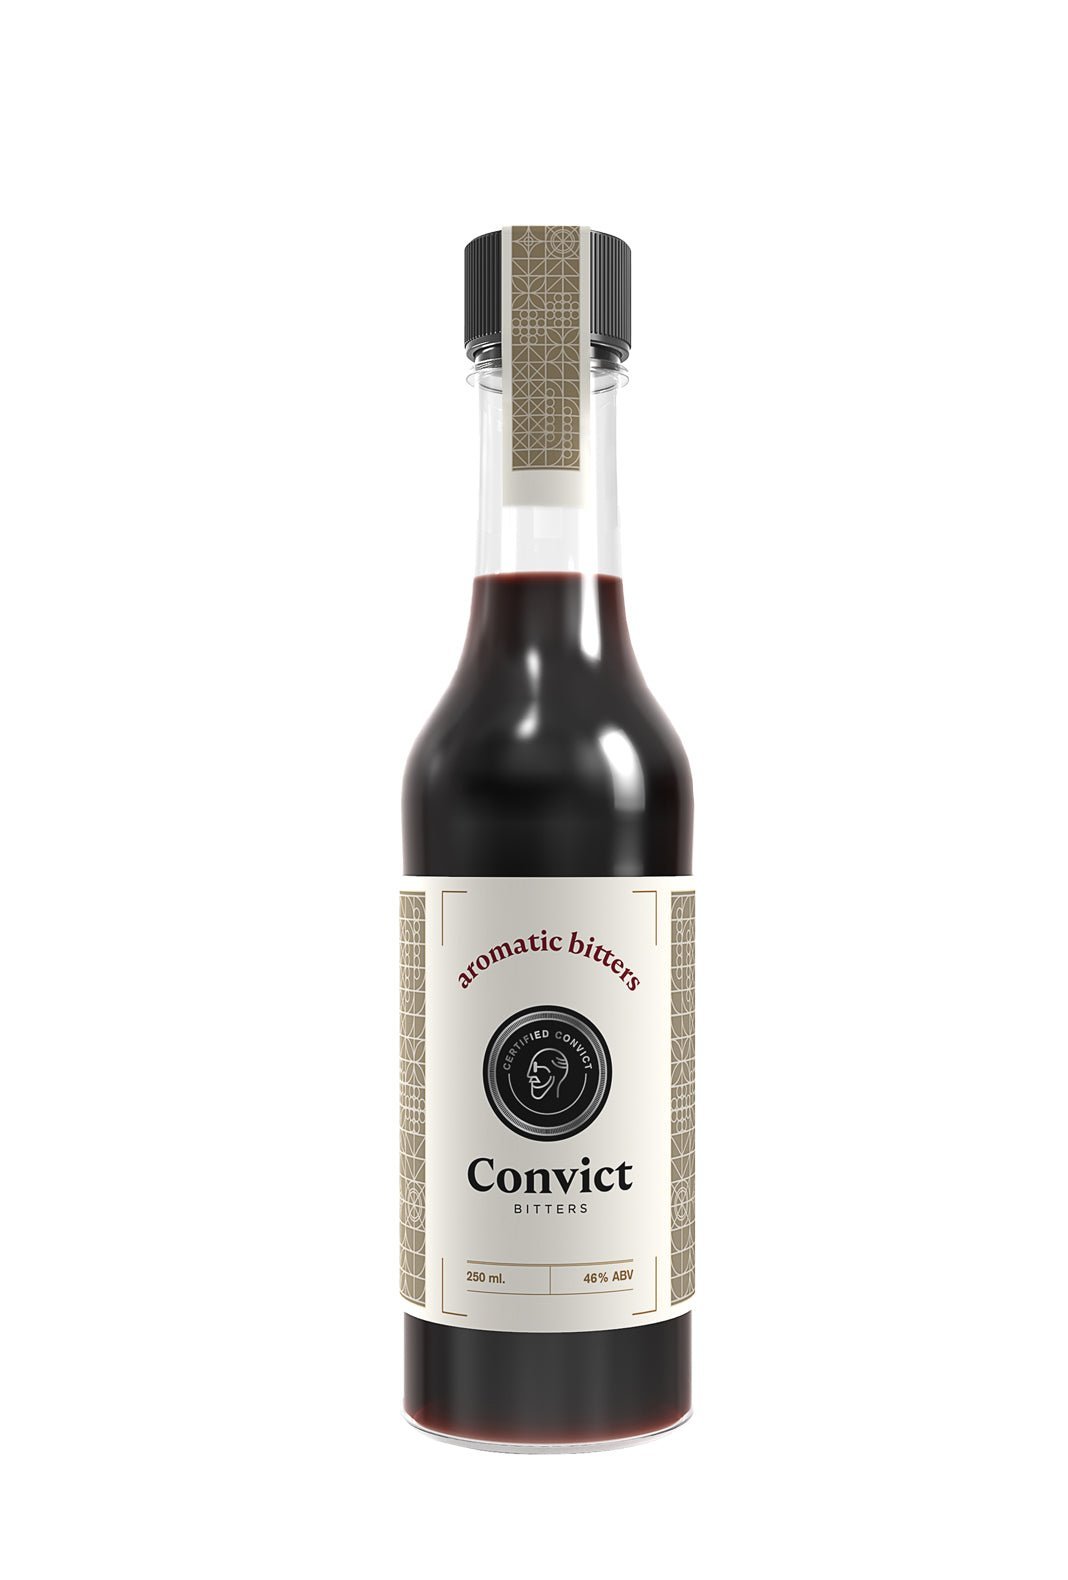 Convict Aromatic Bitters 46% 250ml | bitters | Shop online at Spirits of France